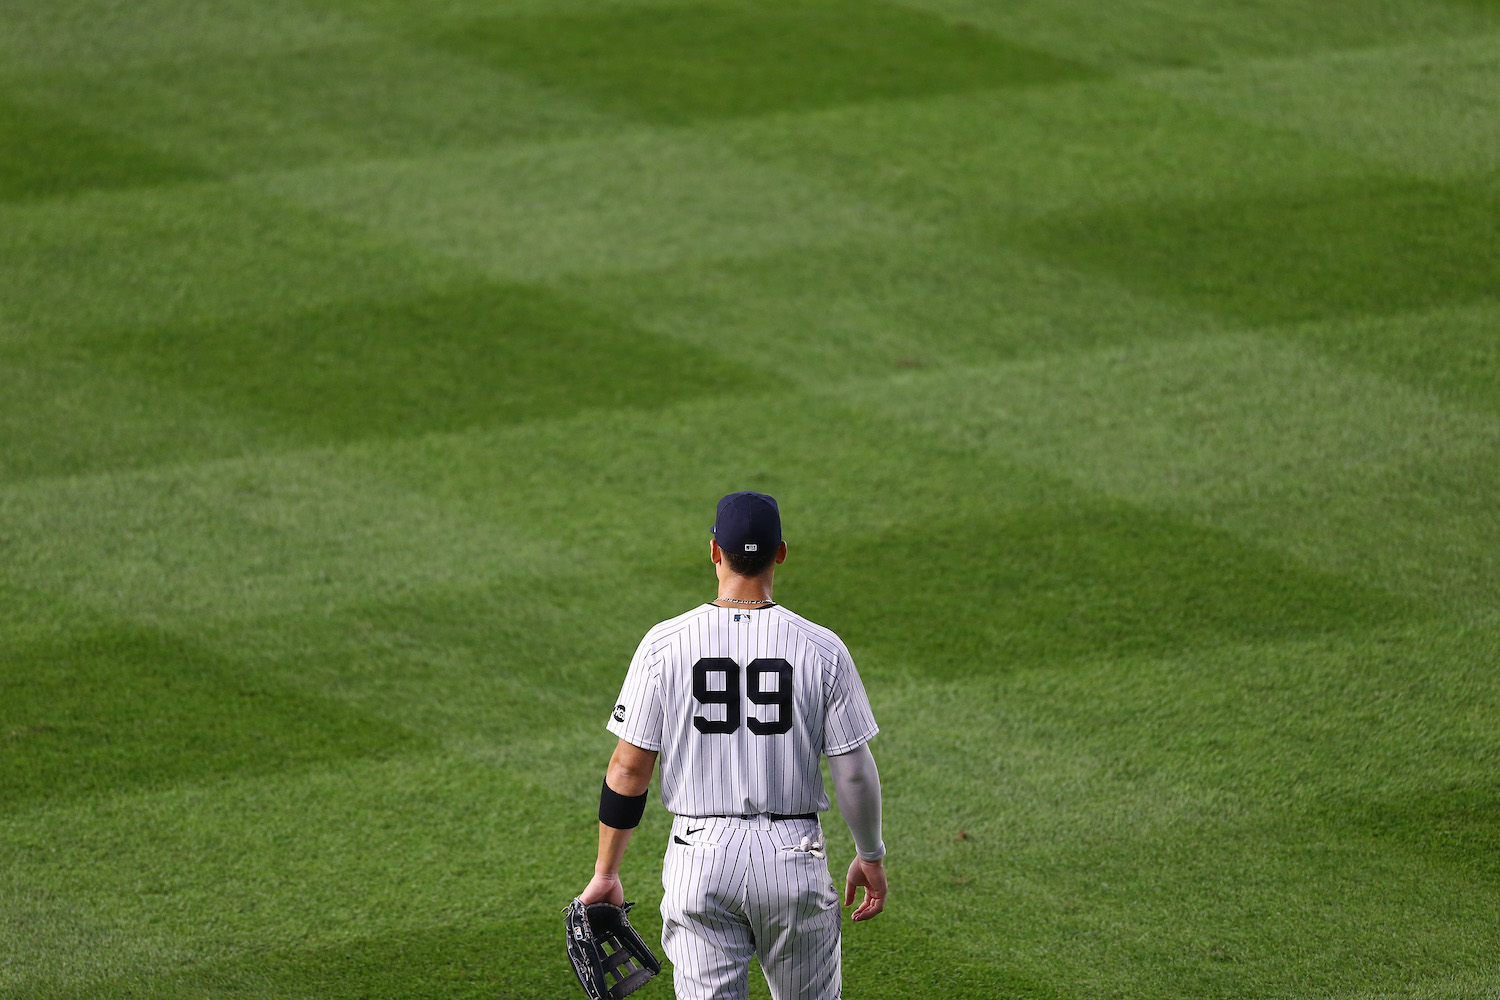 Why Does Aaron Judge Wear Number 99?